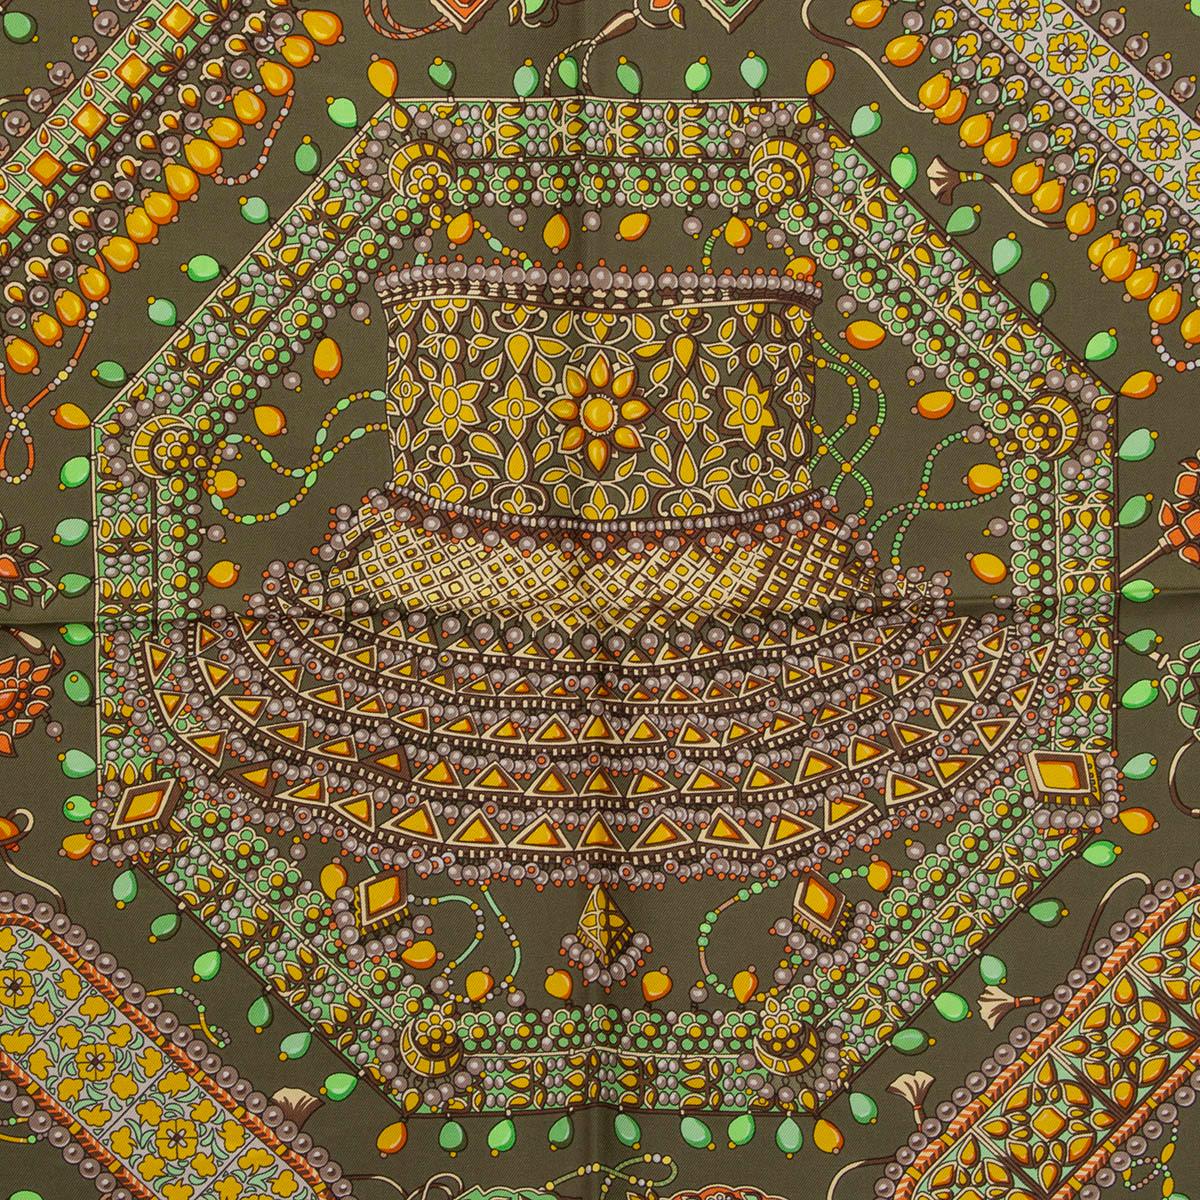 100% authentic Hermes 'Parures des Maharajas 90' scarf by Catherine Baschet in olive green silk twill (100%) with contrasting black hem and details in orange, lime green, taupe, beige and brown. Has been worn and is in excellent